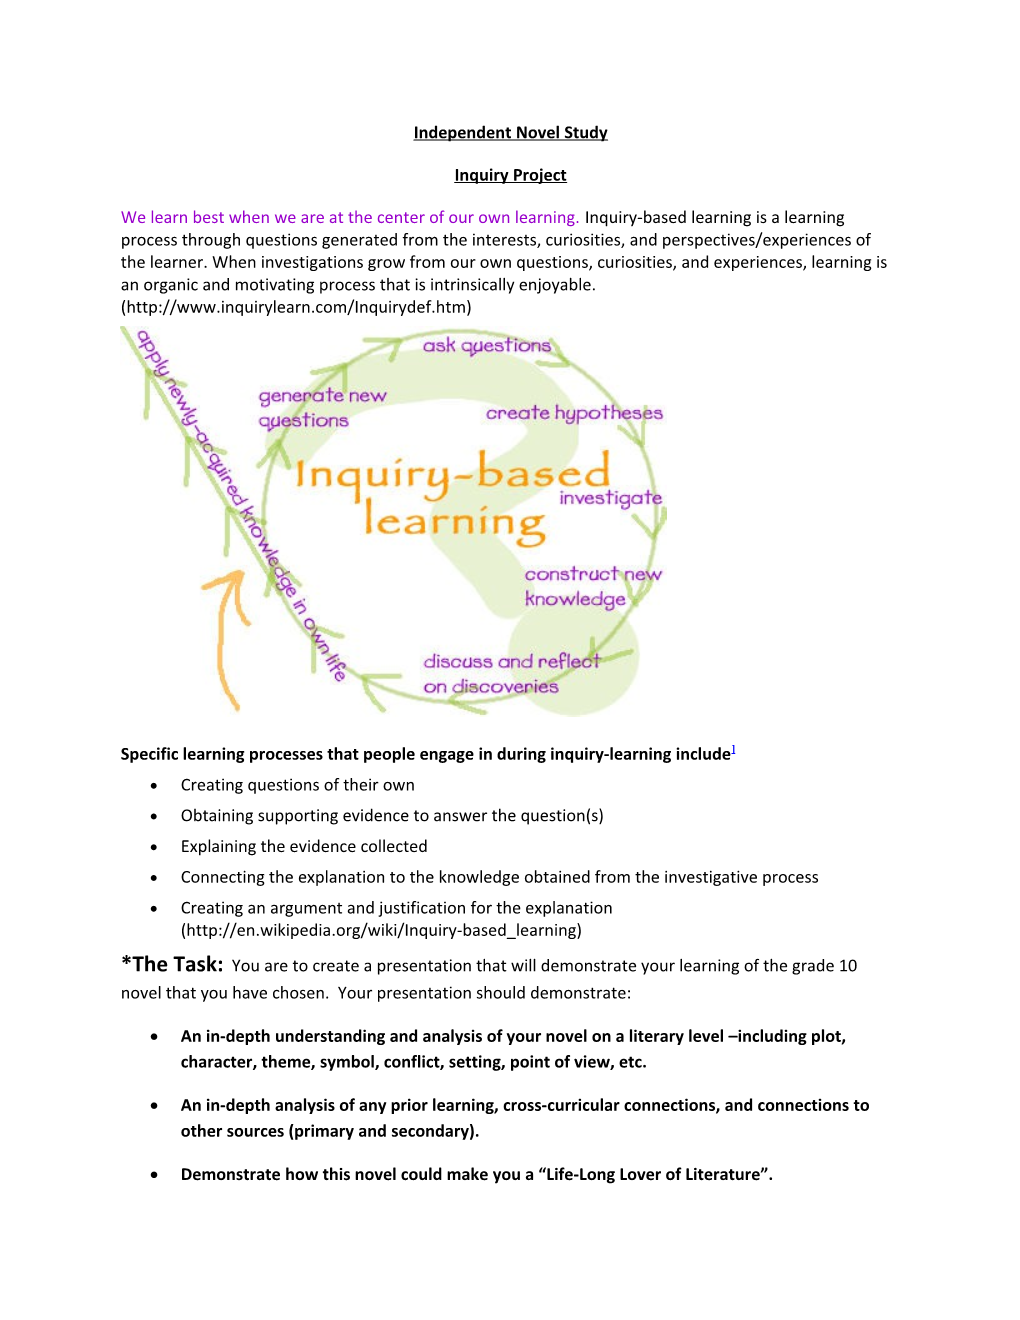 Specific Learning Processes That People Engage in During Inquiry-Learning Include